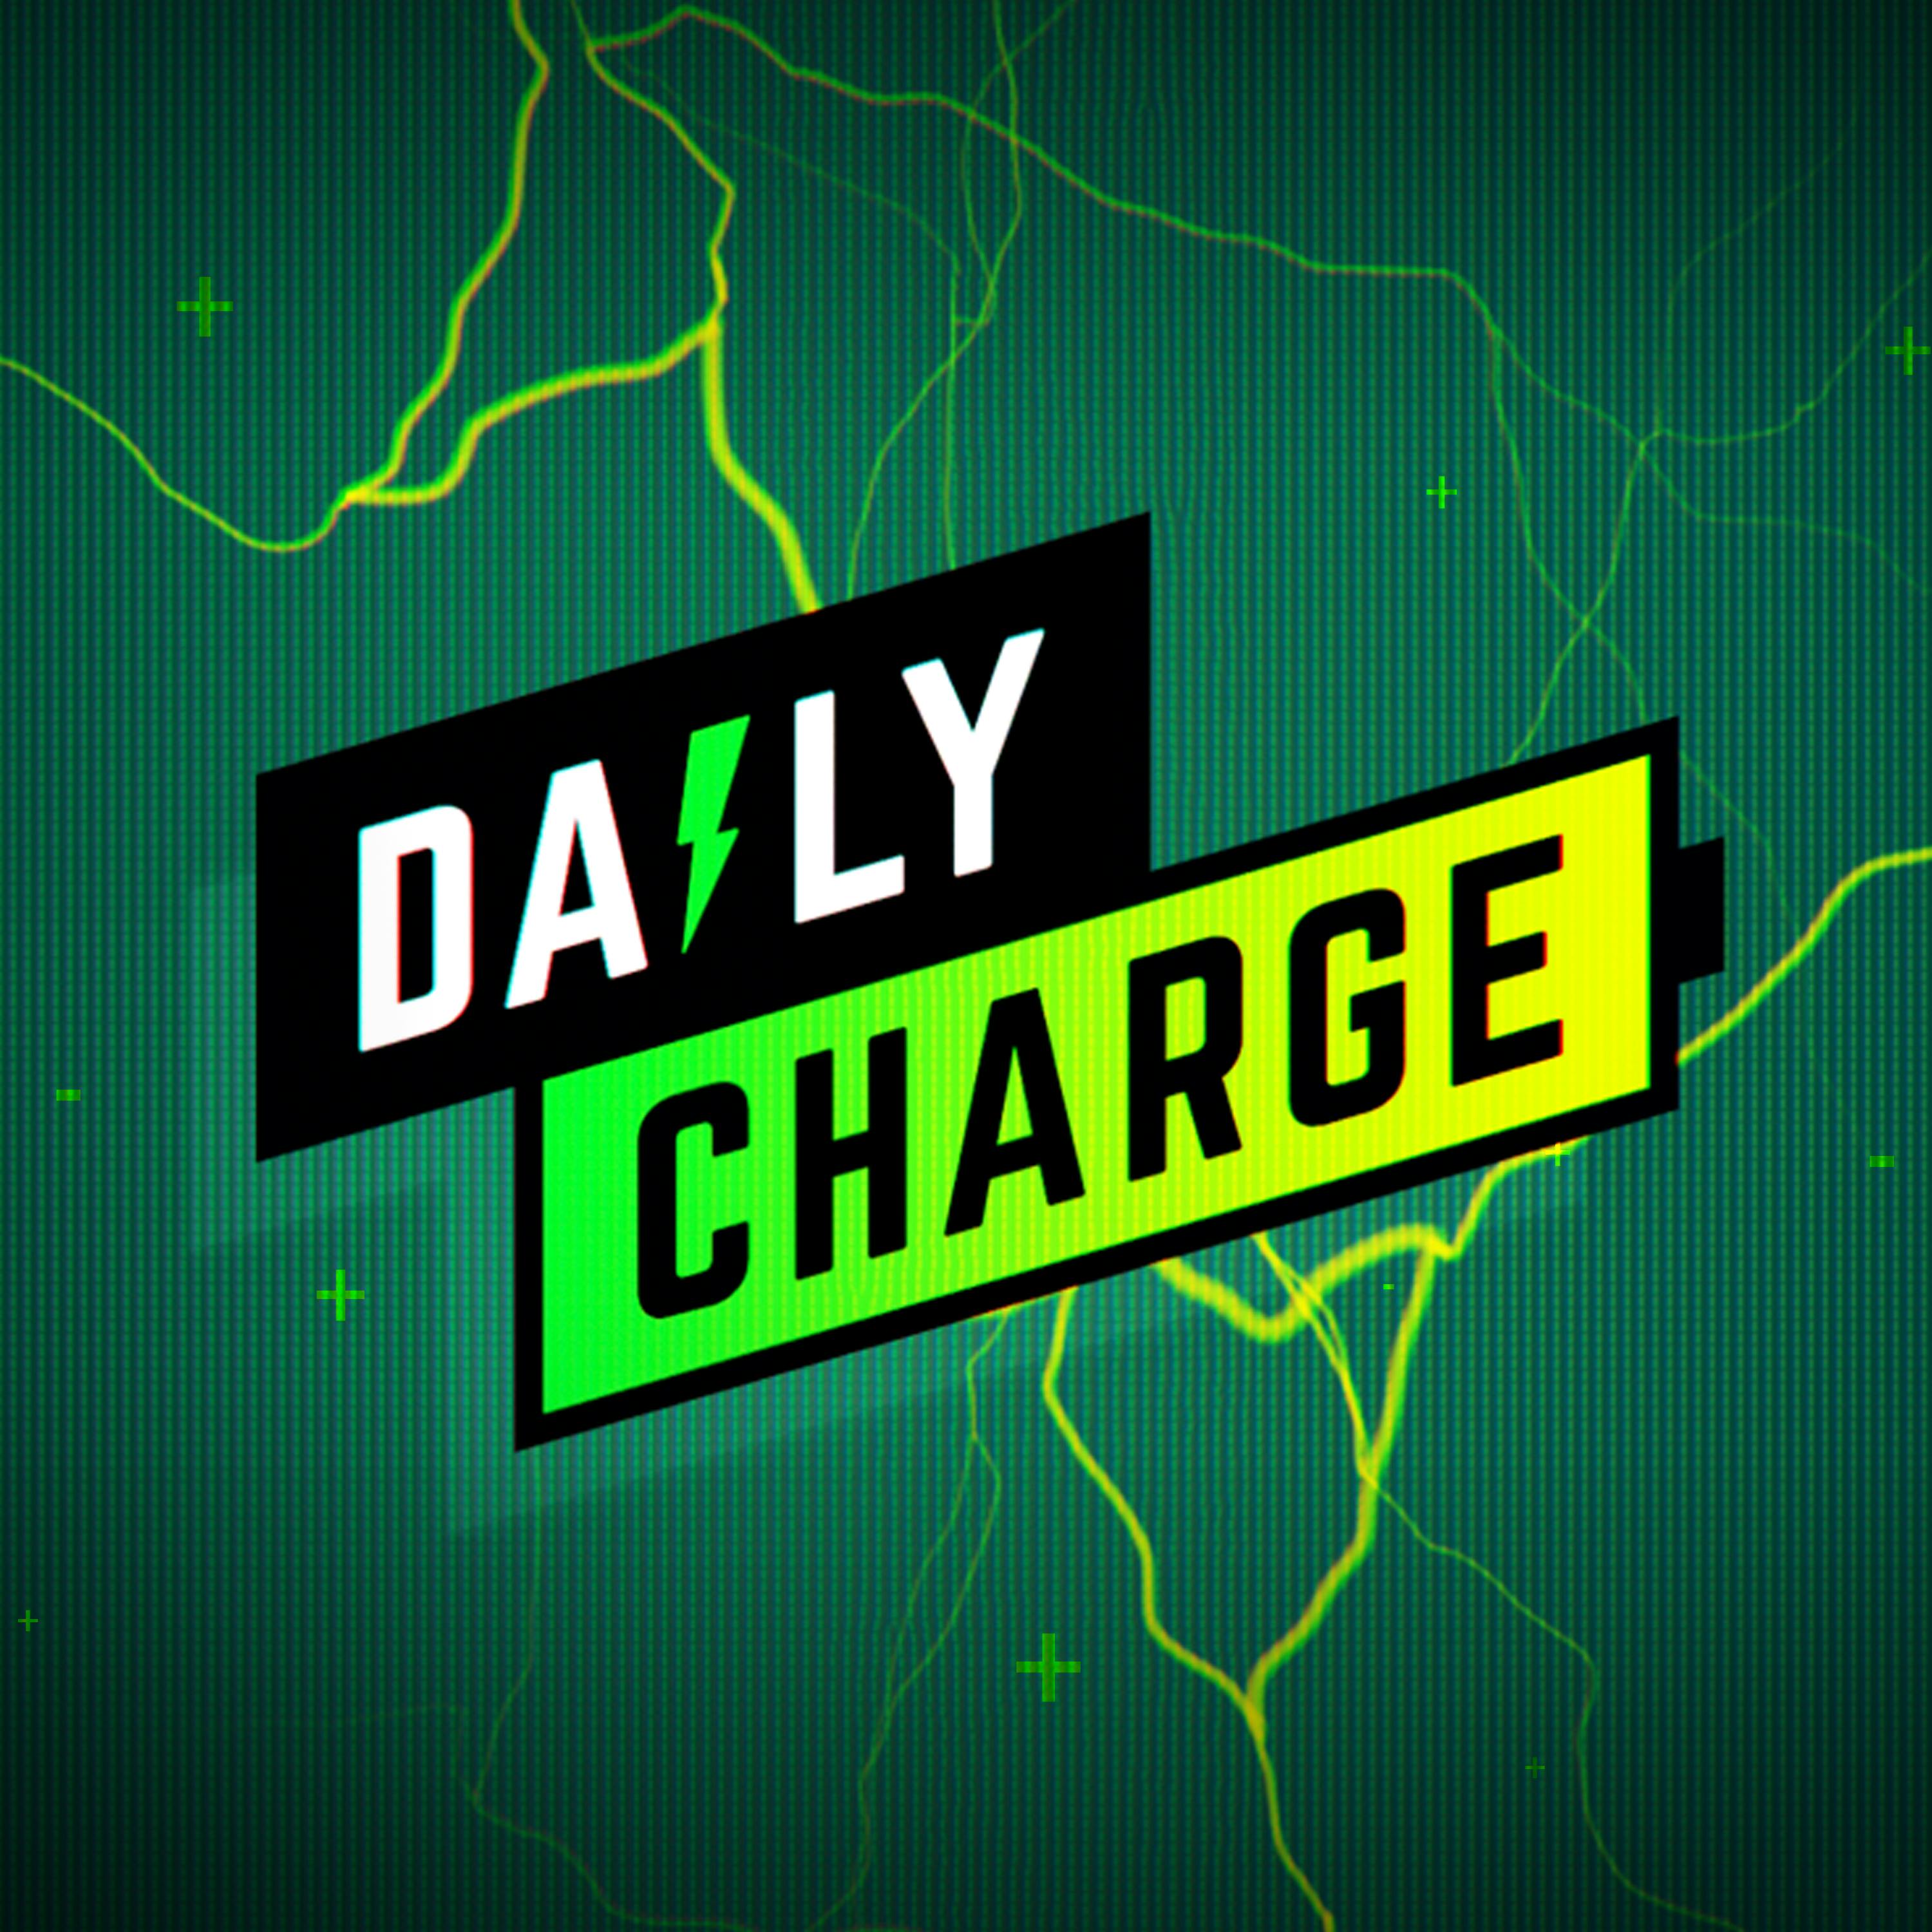 The Daily Charge